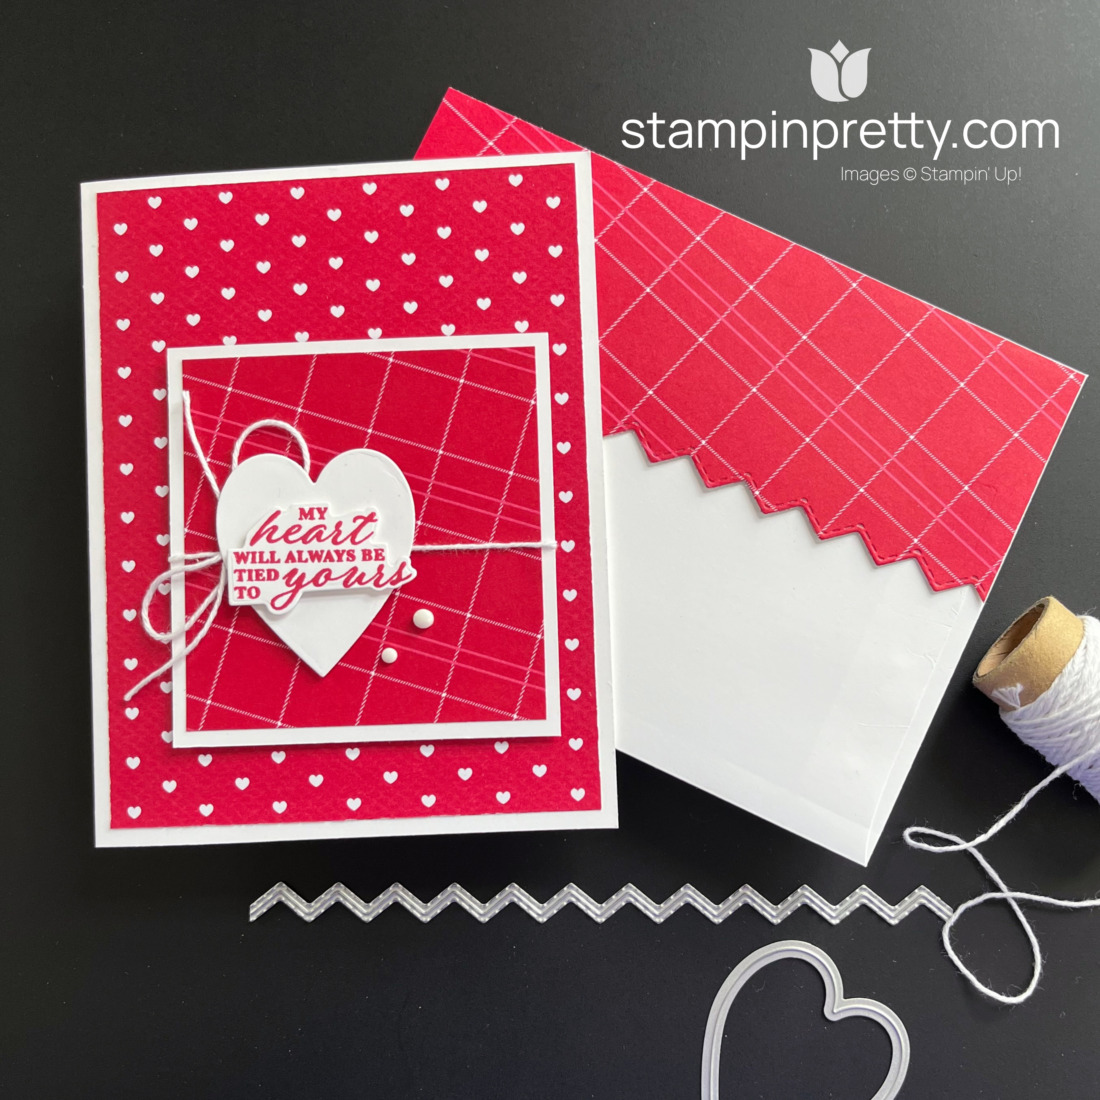 Most Adored Designer Series Paper Is Valentine Card Magic! Stampin Up! Products - Card Design by Mary Fish, Stampin' Pretty